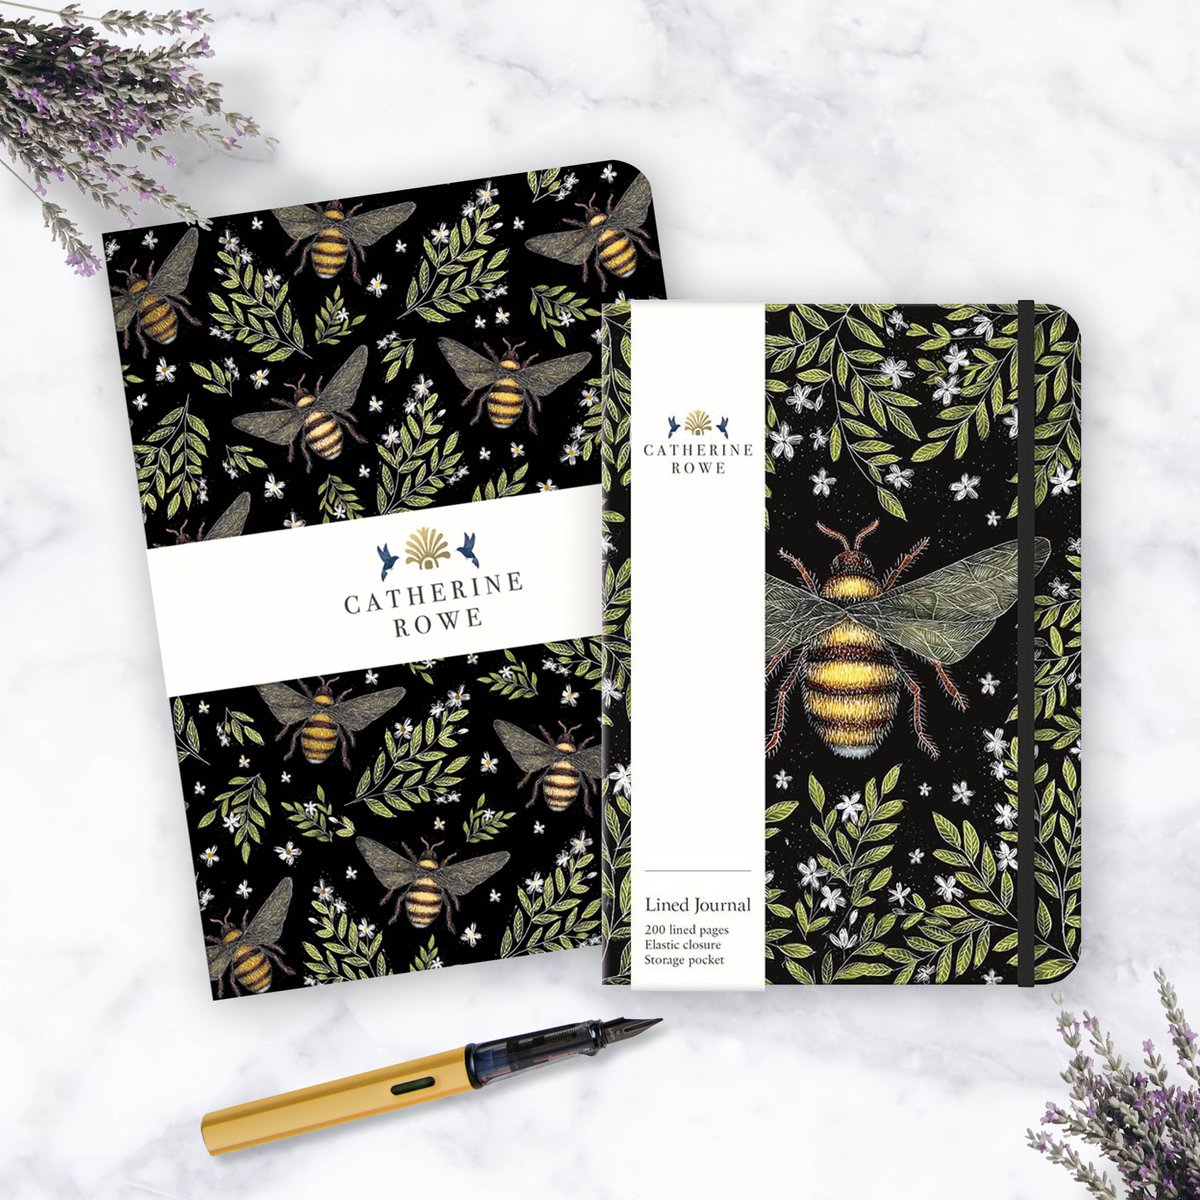 It’s #nationalbeeday ! Celebrating with these fab Bee journals from our stationery collection - by designer @Catherinelrowe